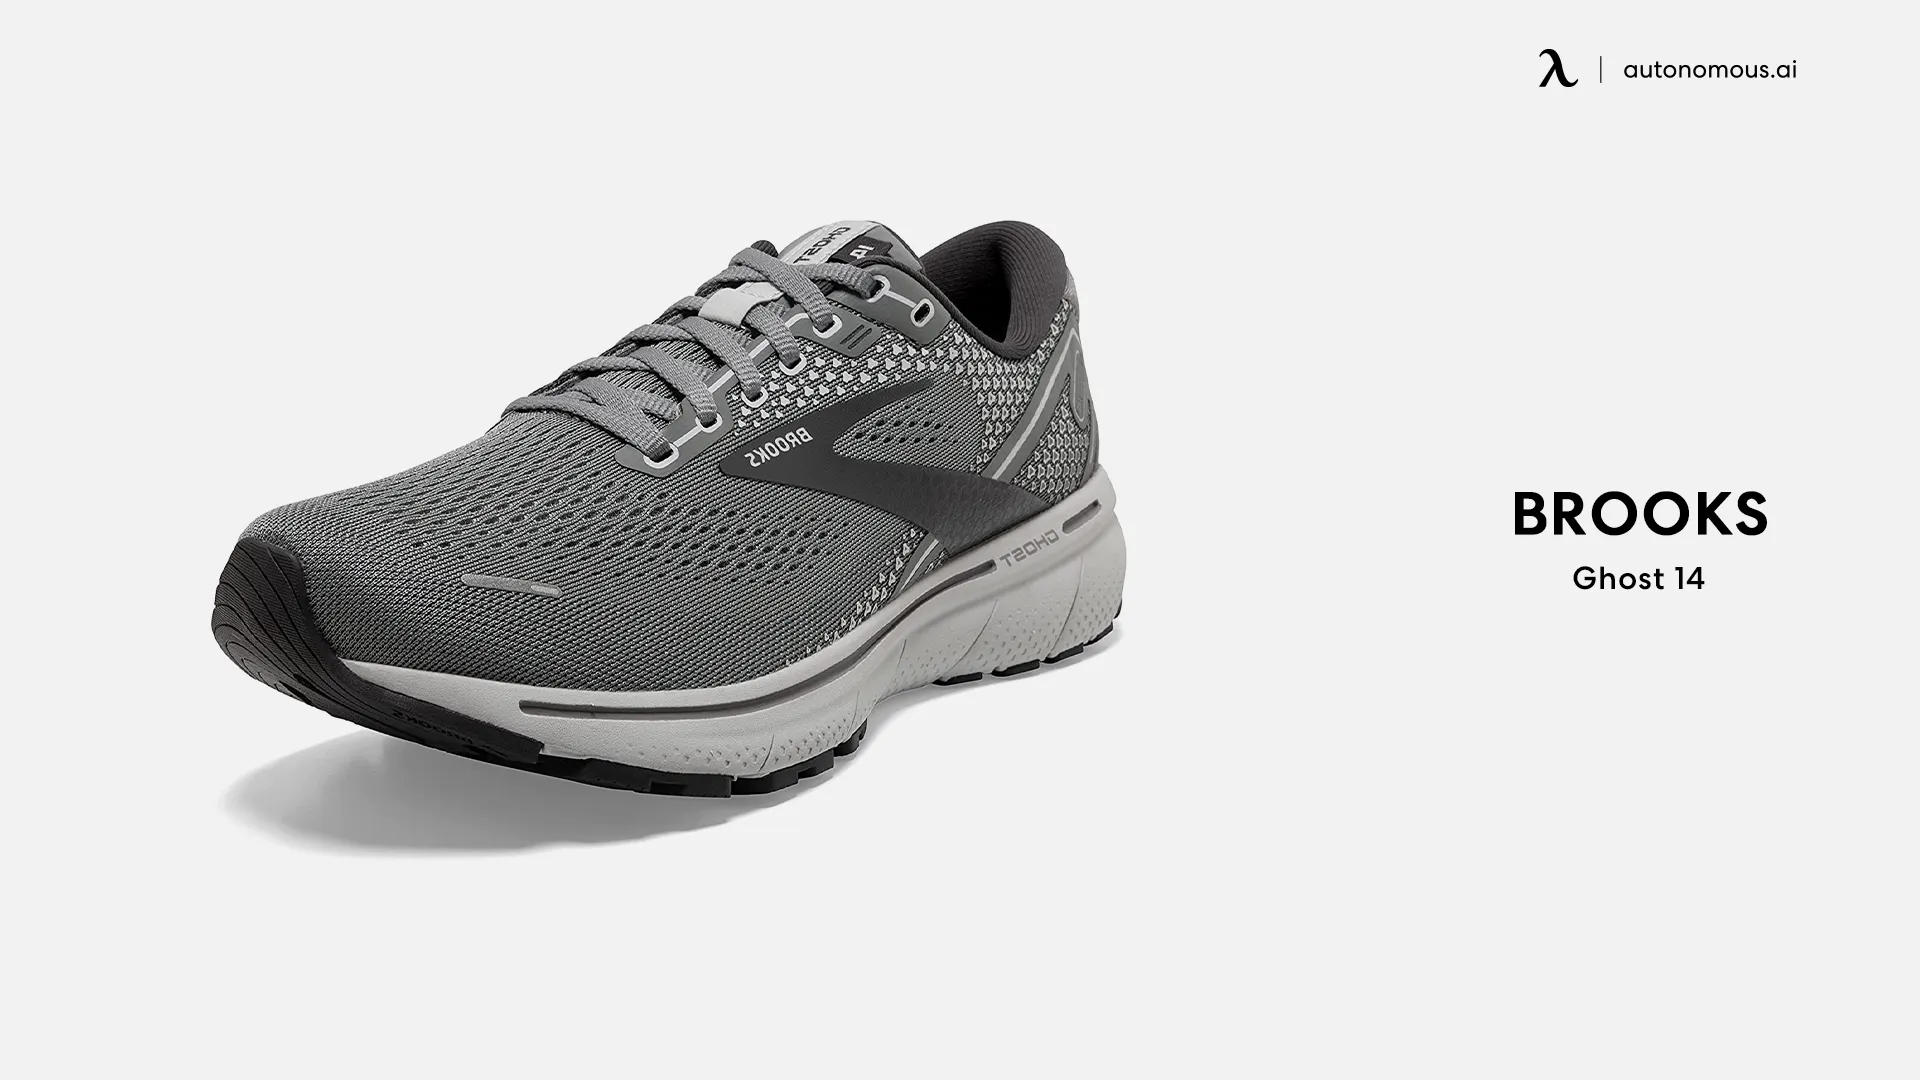 Brooks Ghost 14 shoes for standing all day